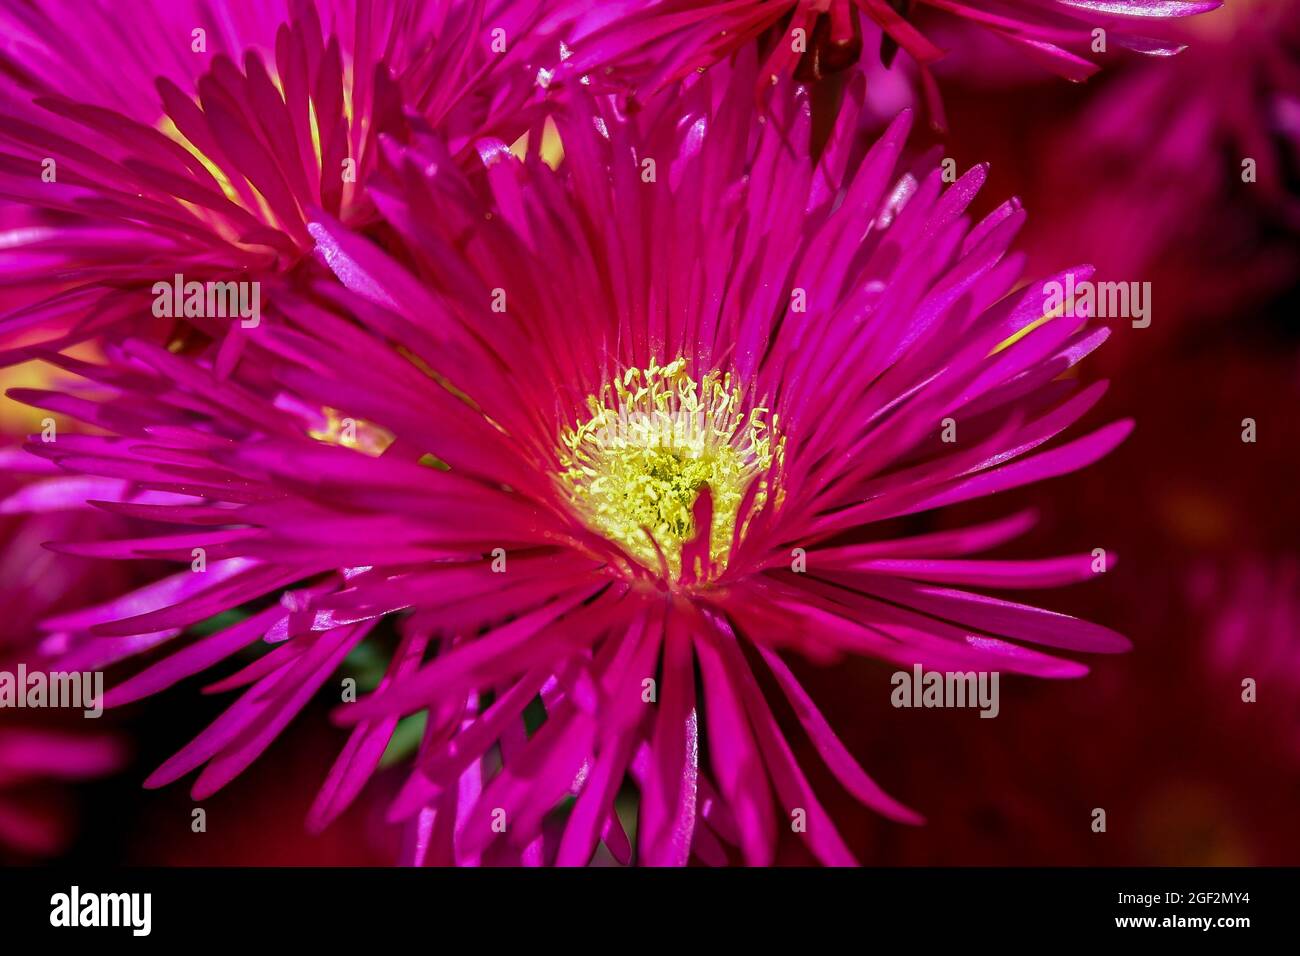 A Reddish-Pink Aster flower with bright yellow pollen Stock Photo